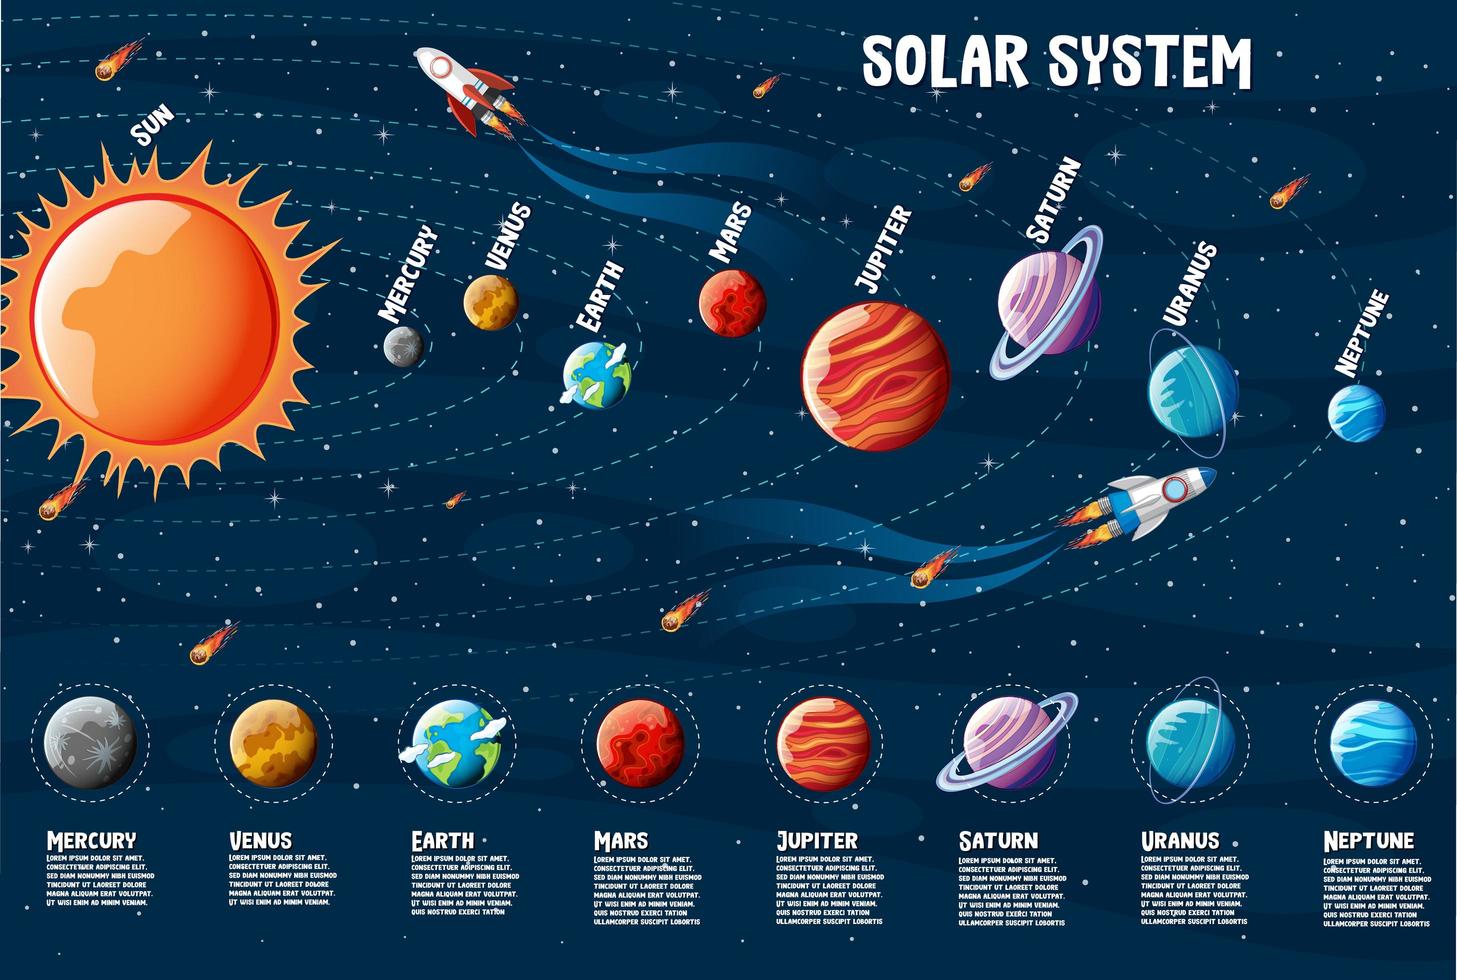 Planets of the solar system information infographic vector